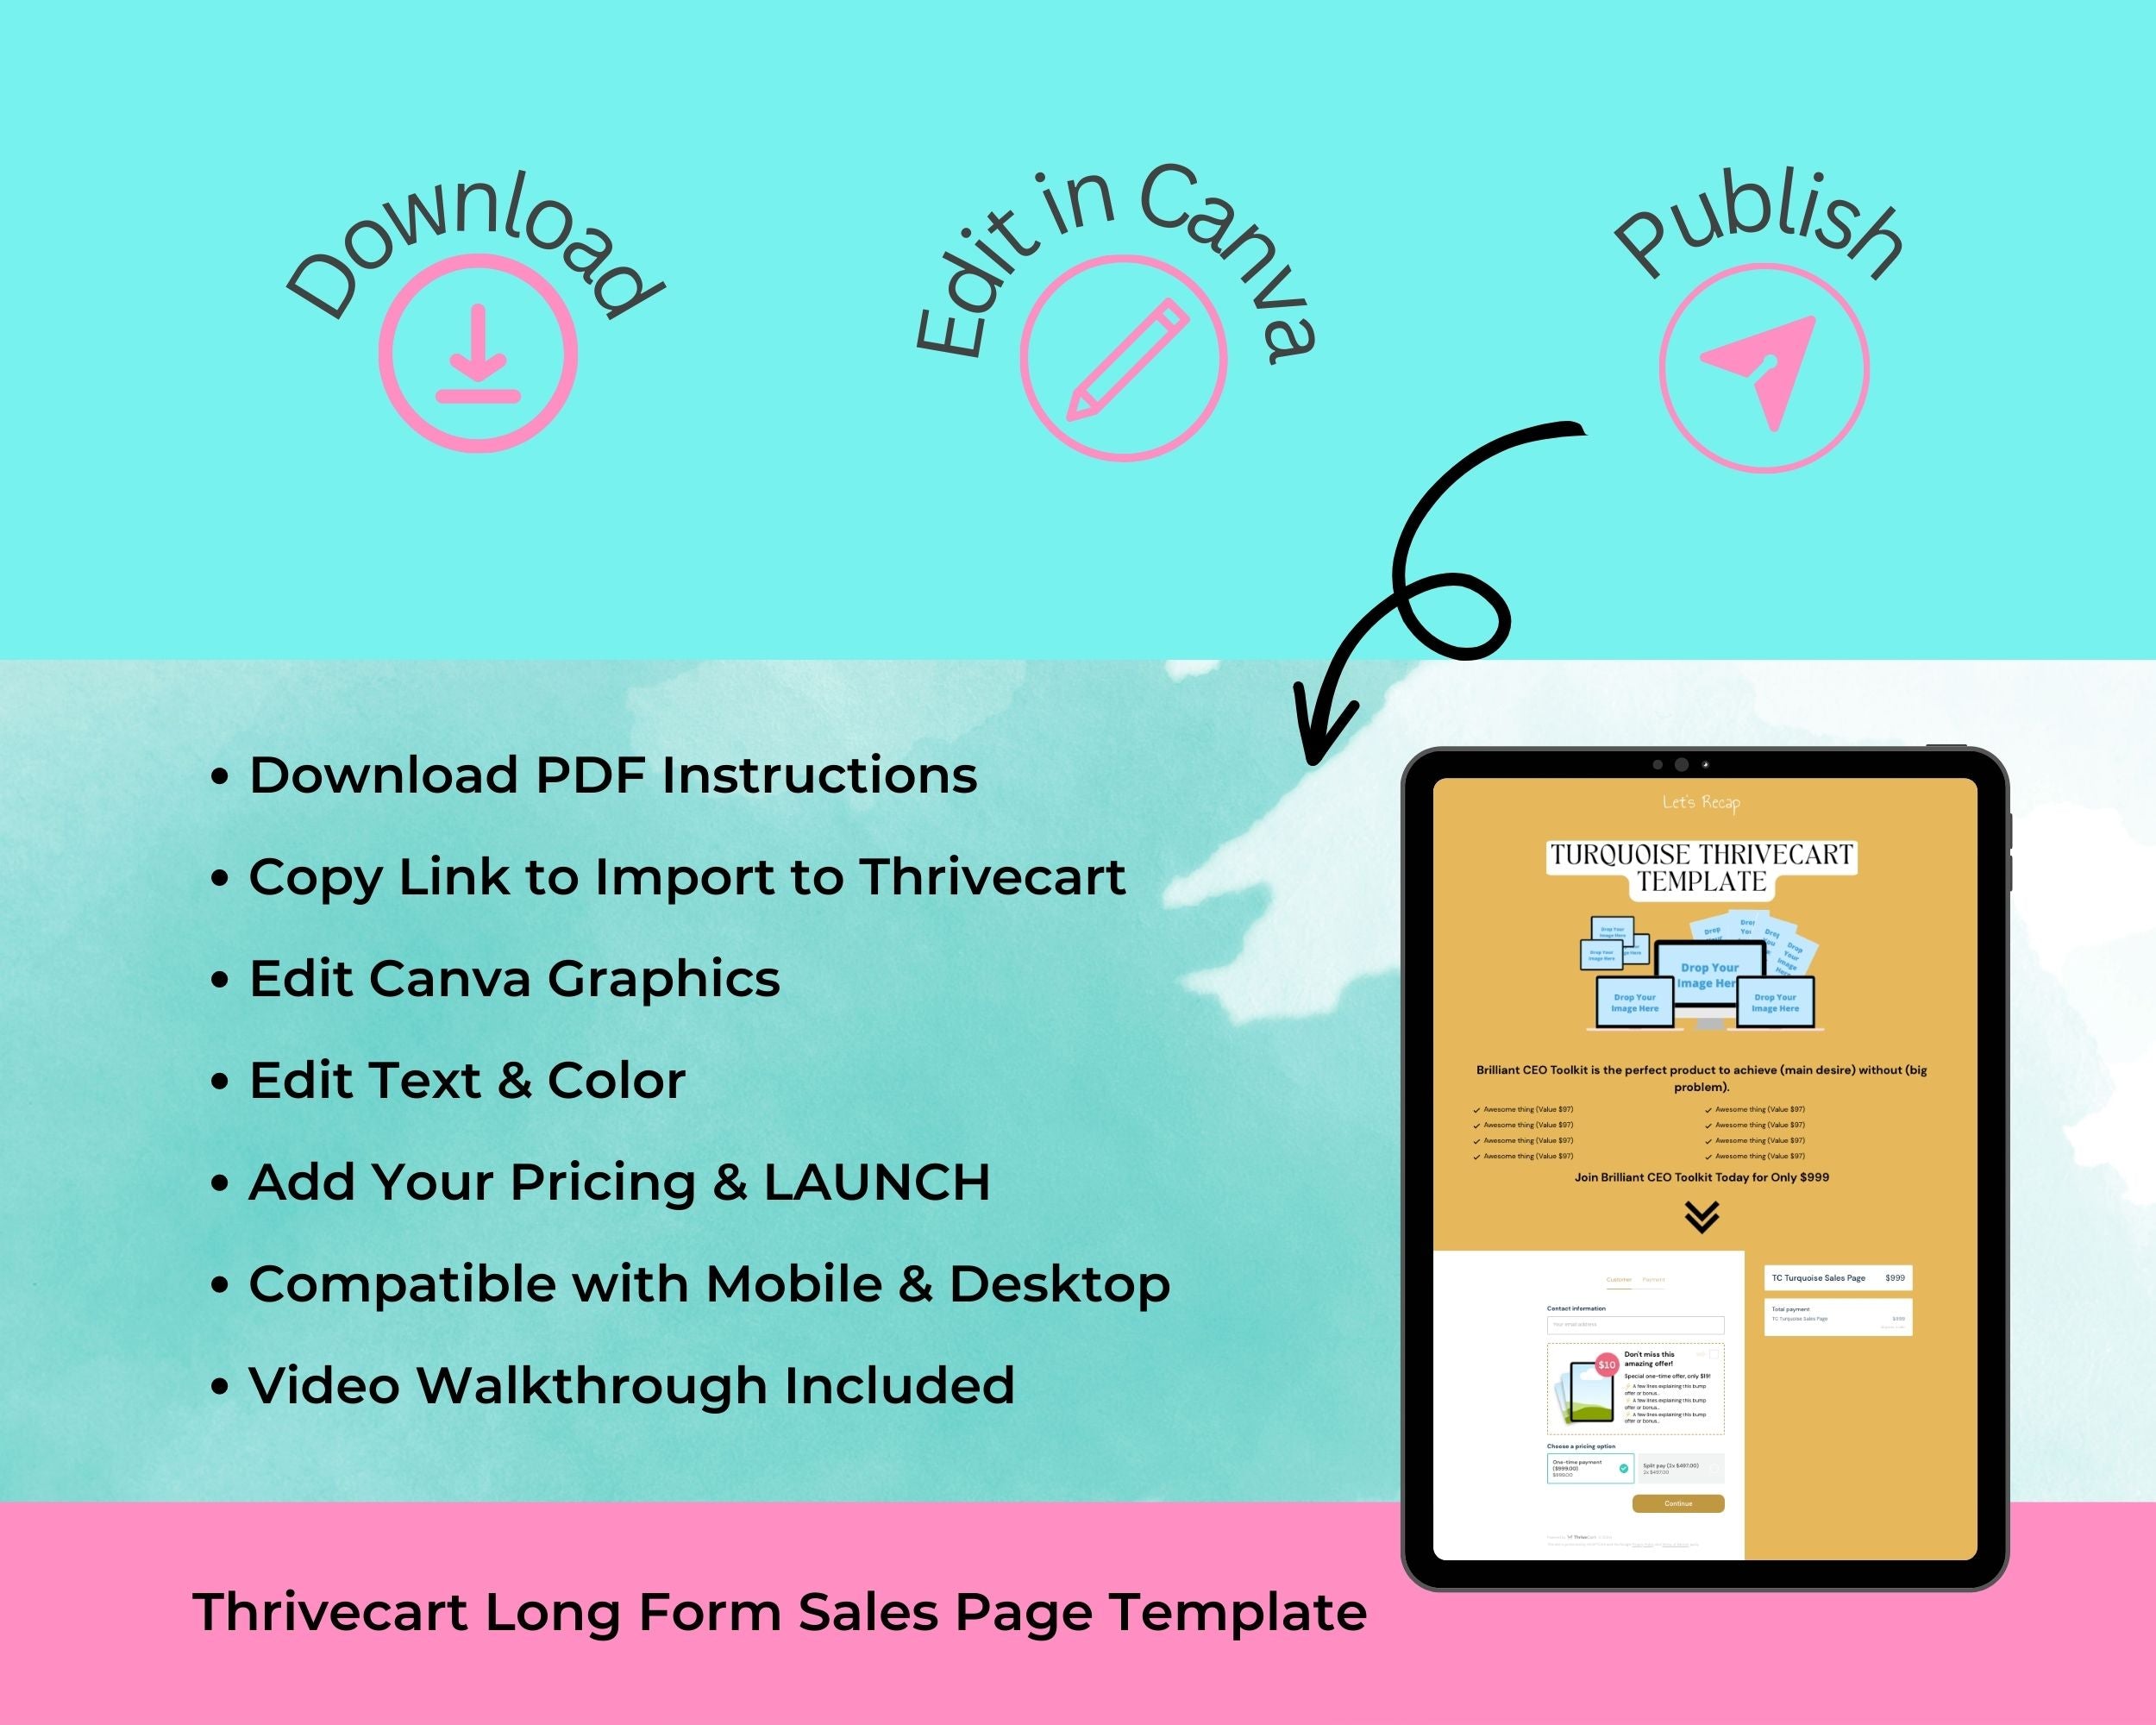 Turquoise Sales Page Template in Thrivecart